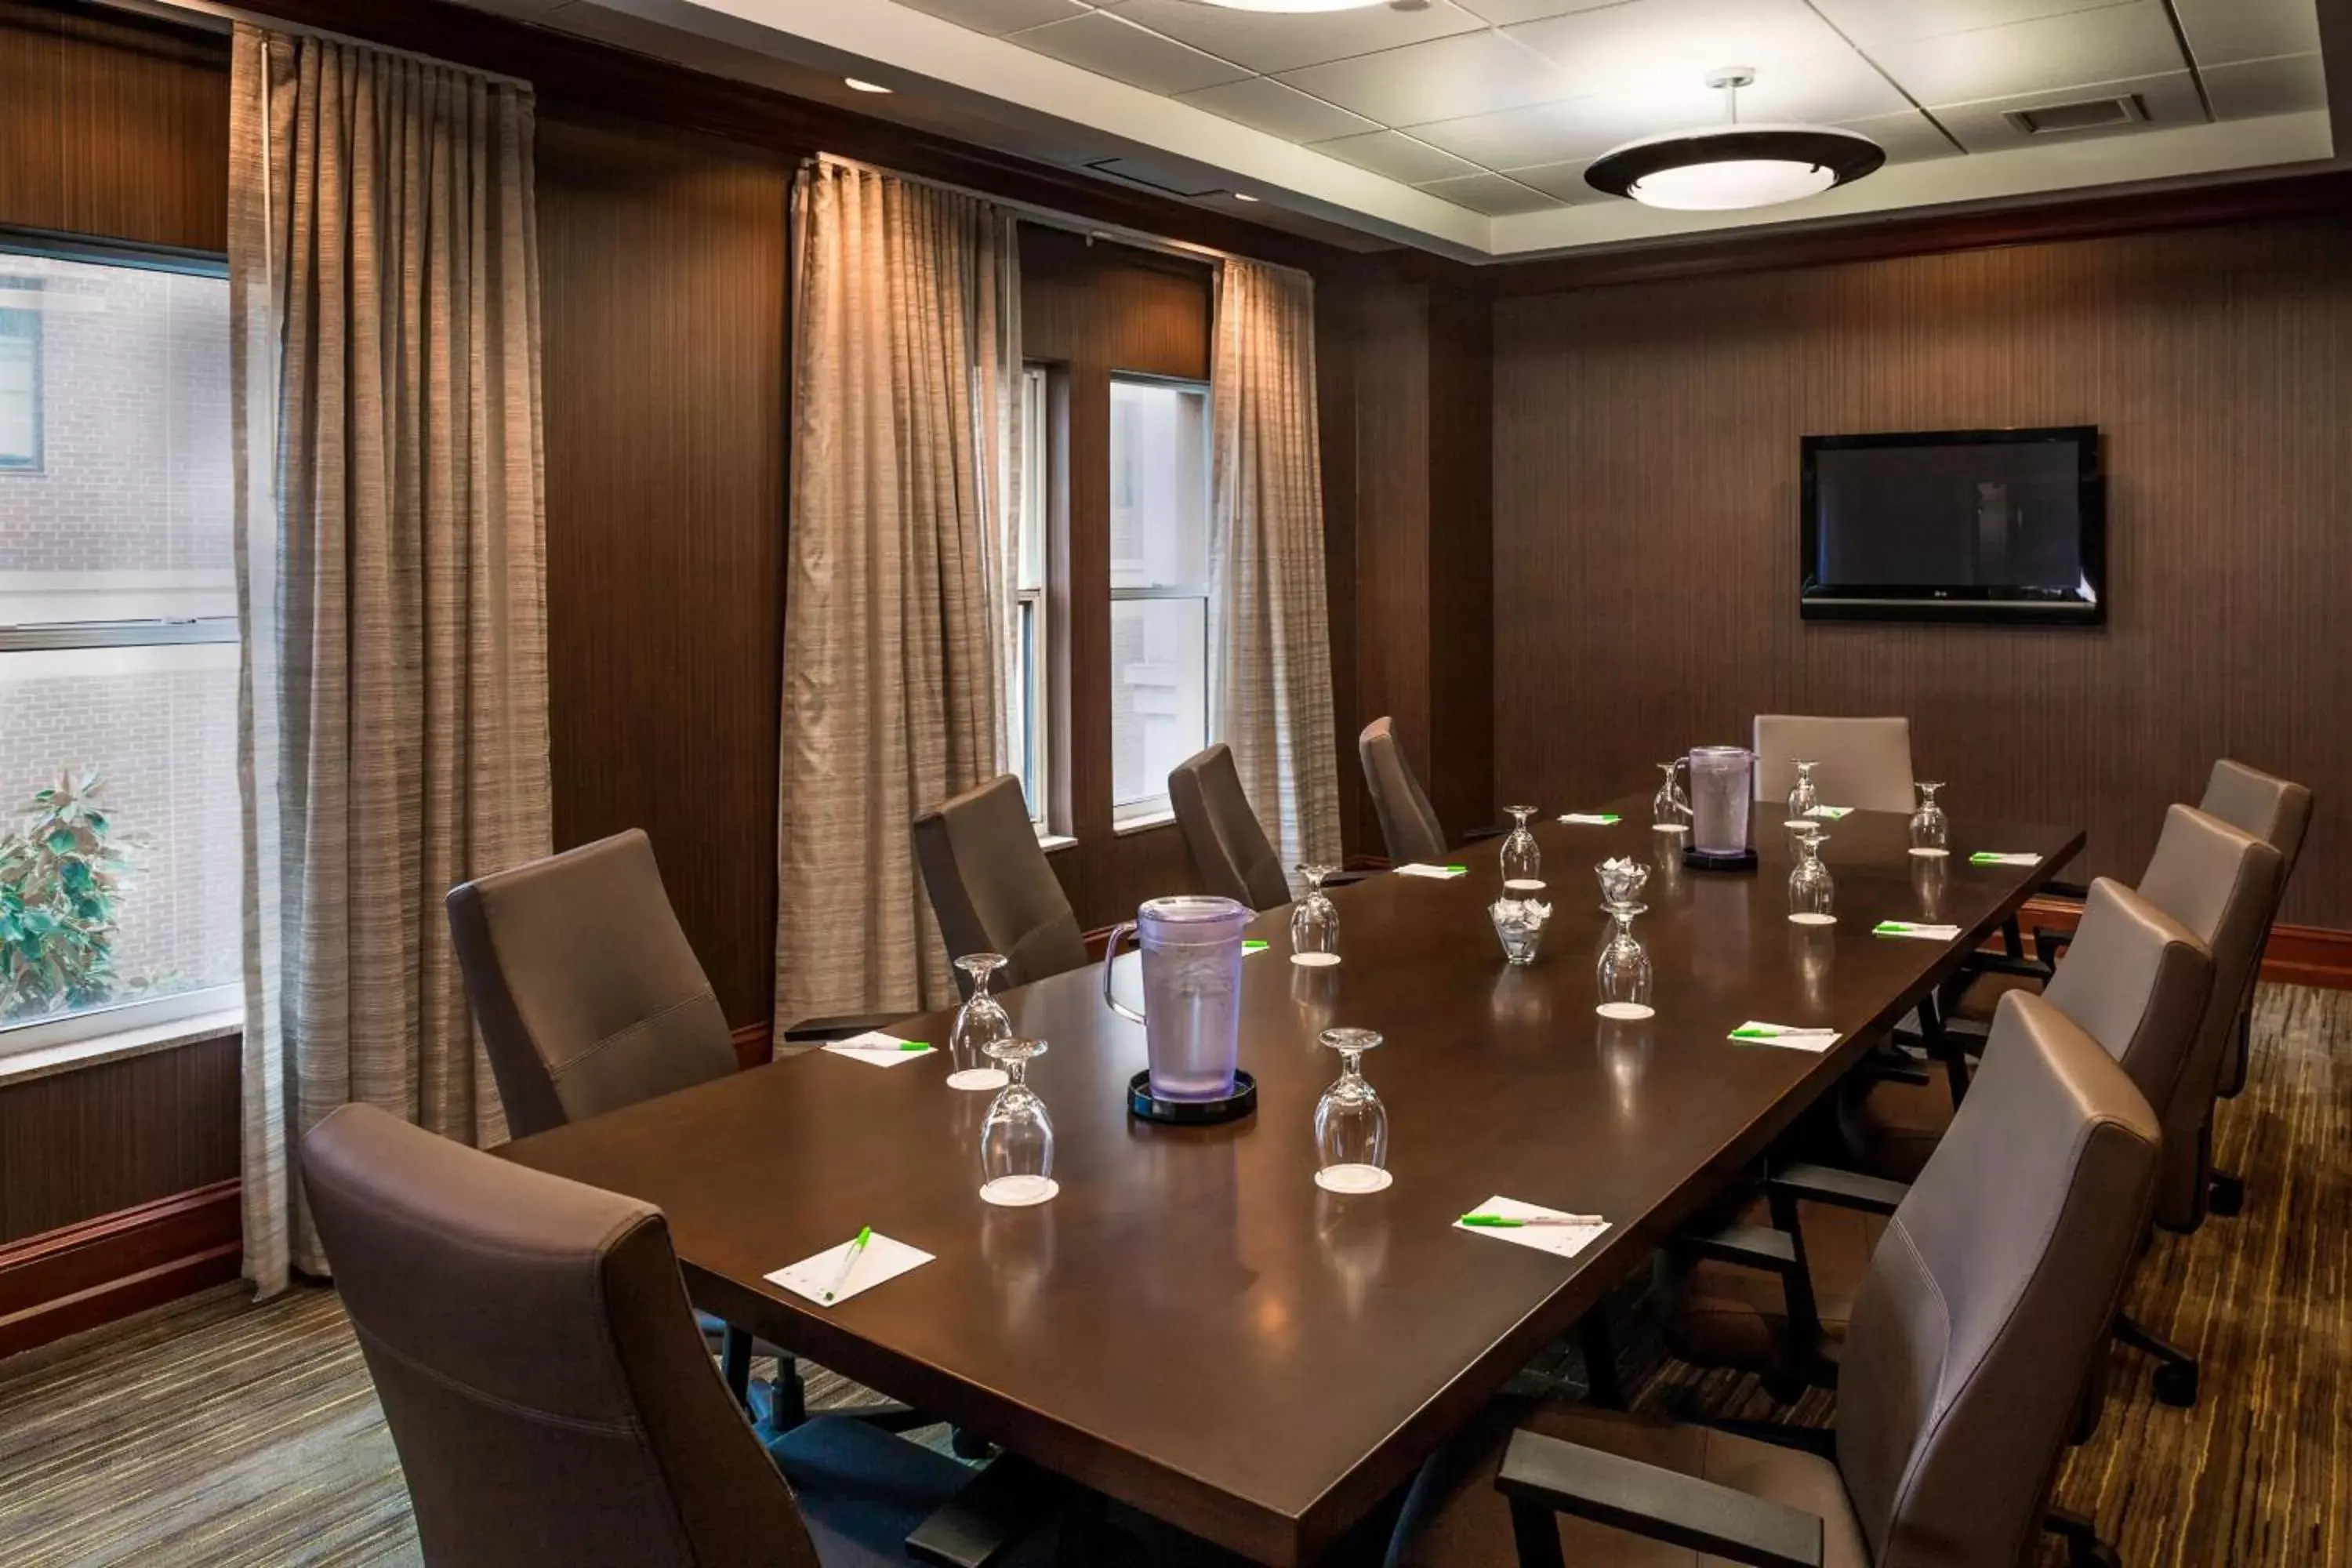 Meeting/conference room in Courtyard by Marriott Norfolk Downtown